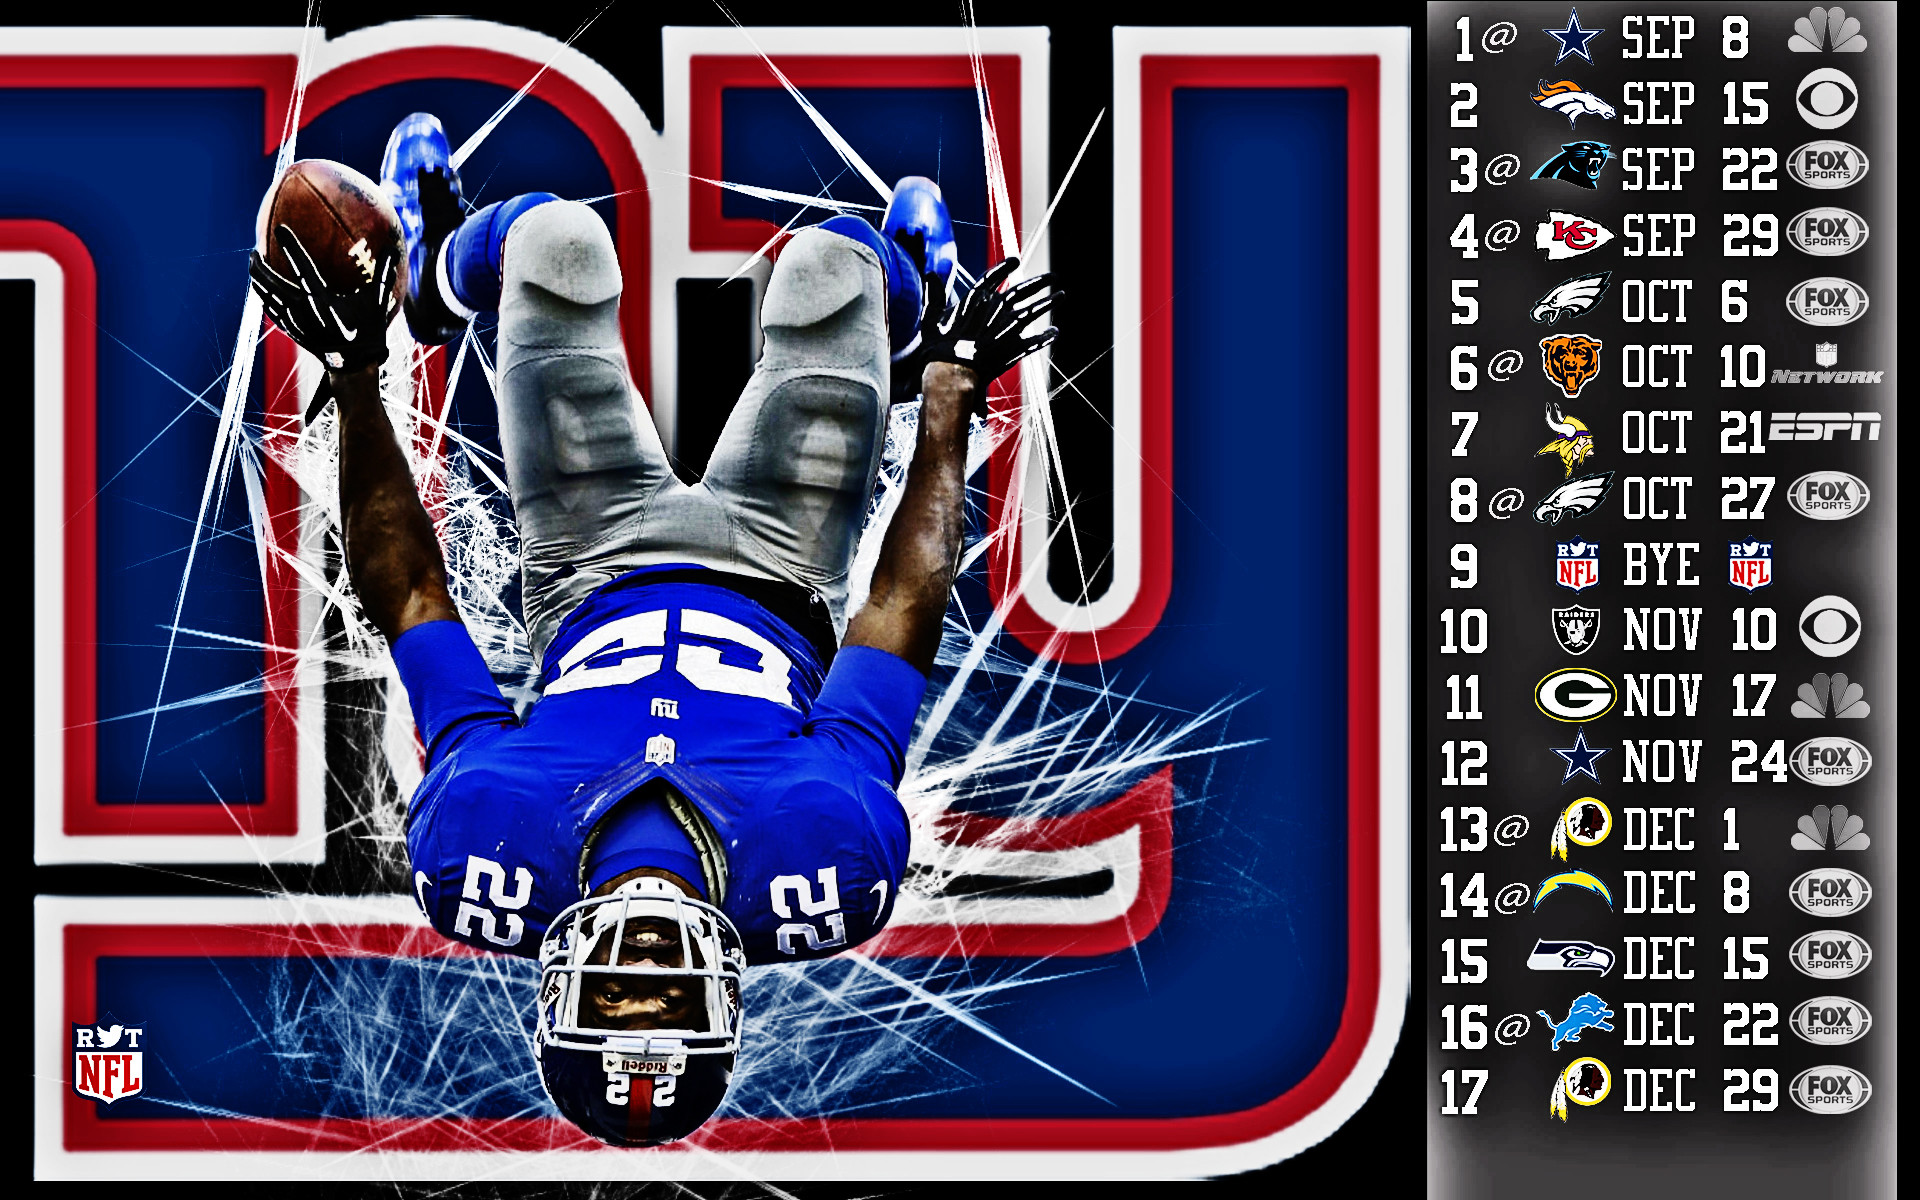 2013 Giants Schedule Wallpapers [Archive] – New York Giants Fan Forum |  Free Wallpapers | Pinterest | Giants schedule and Wallpaper